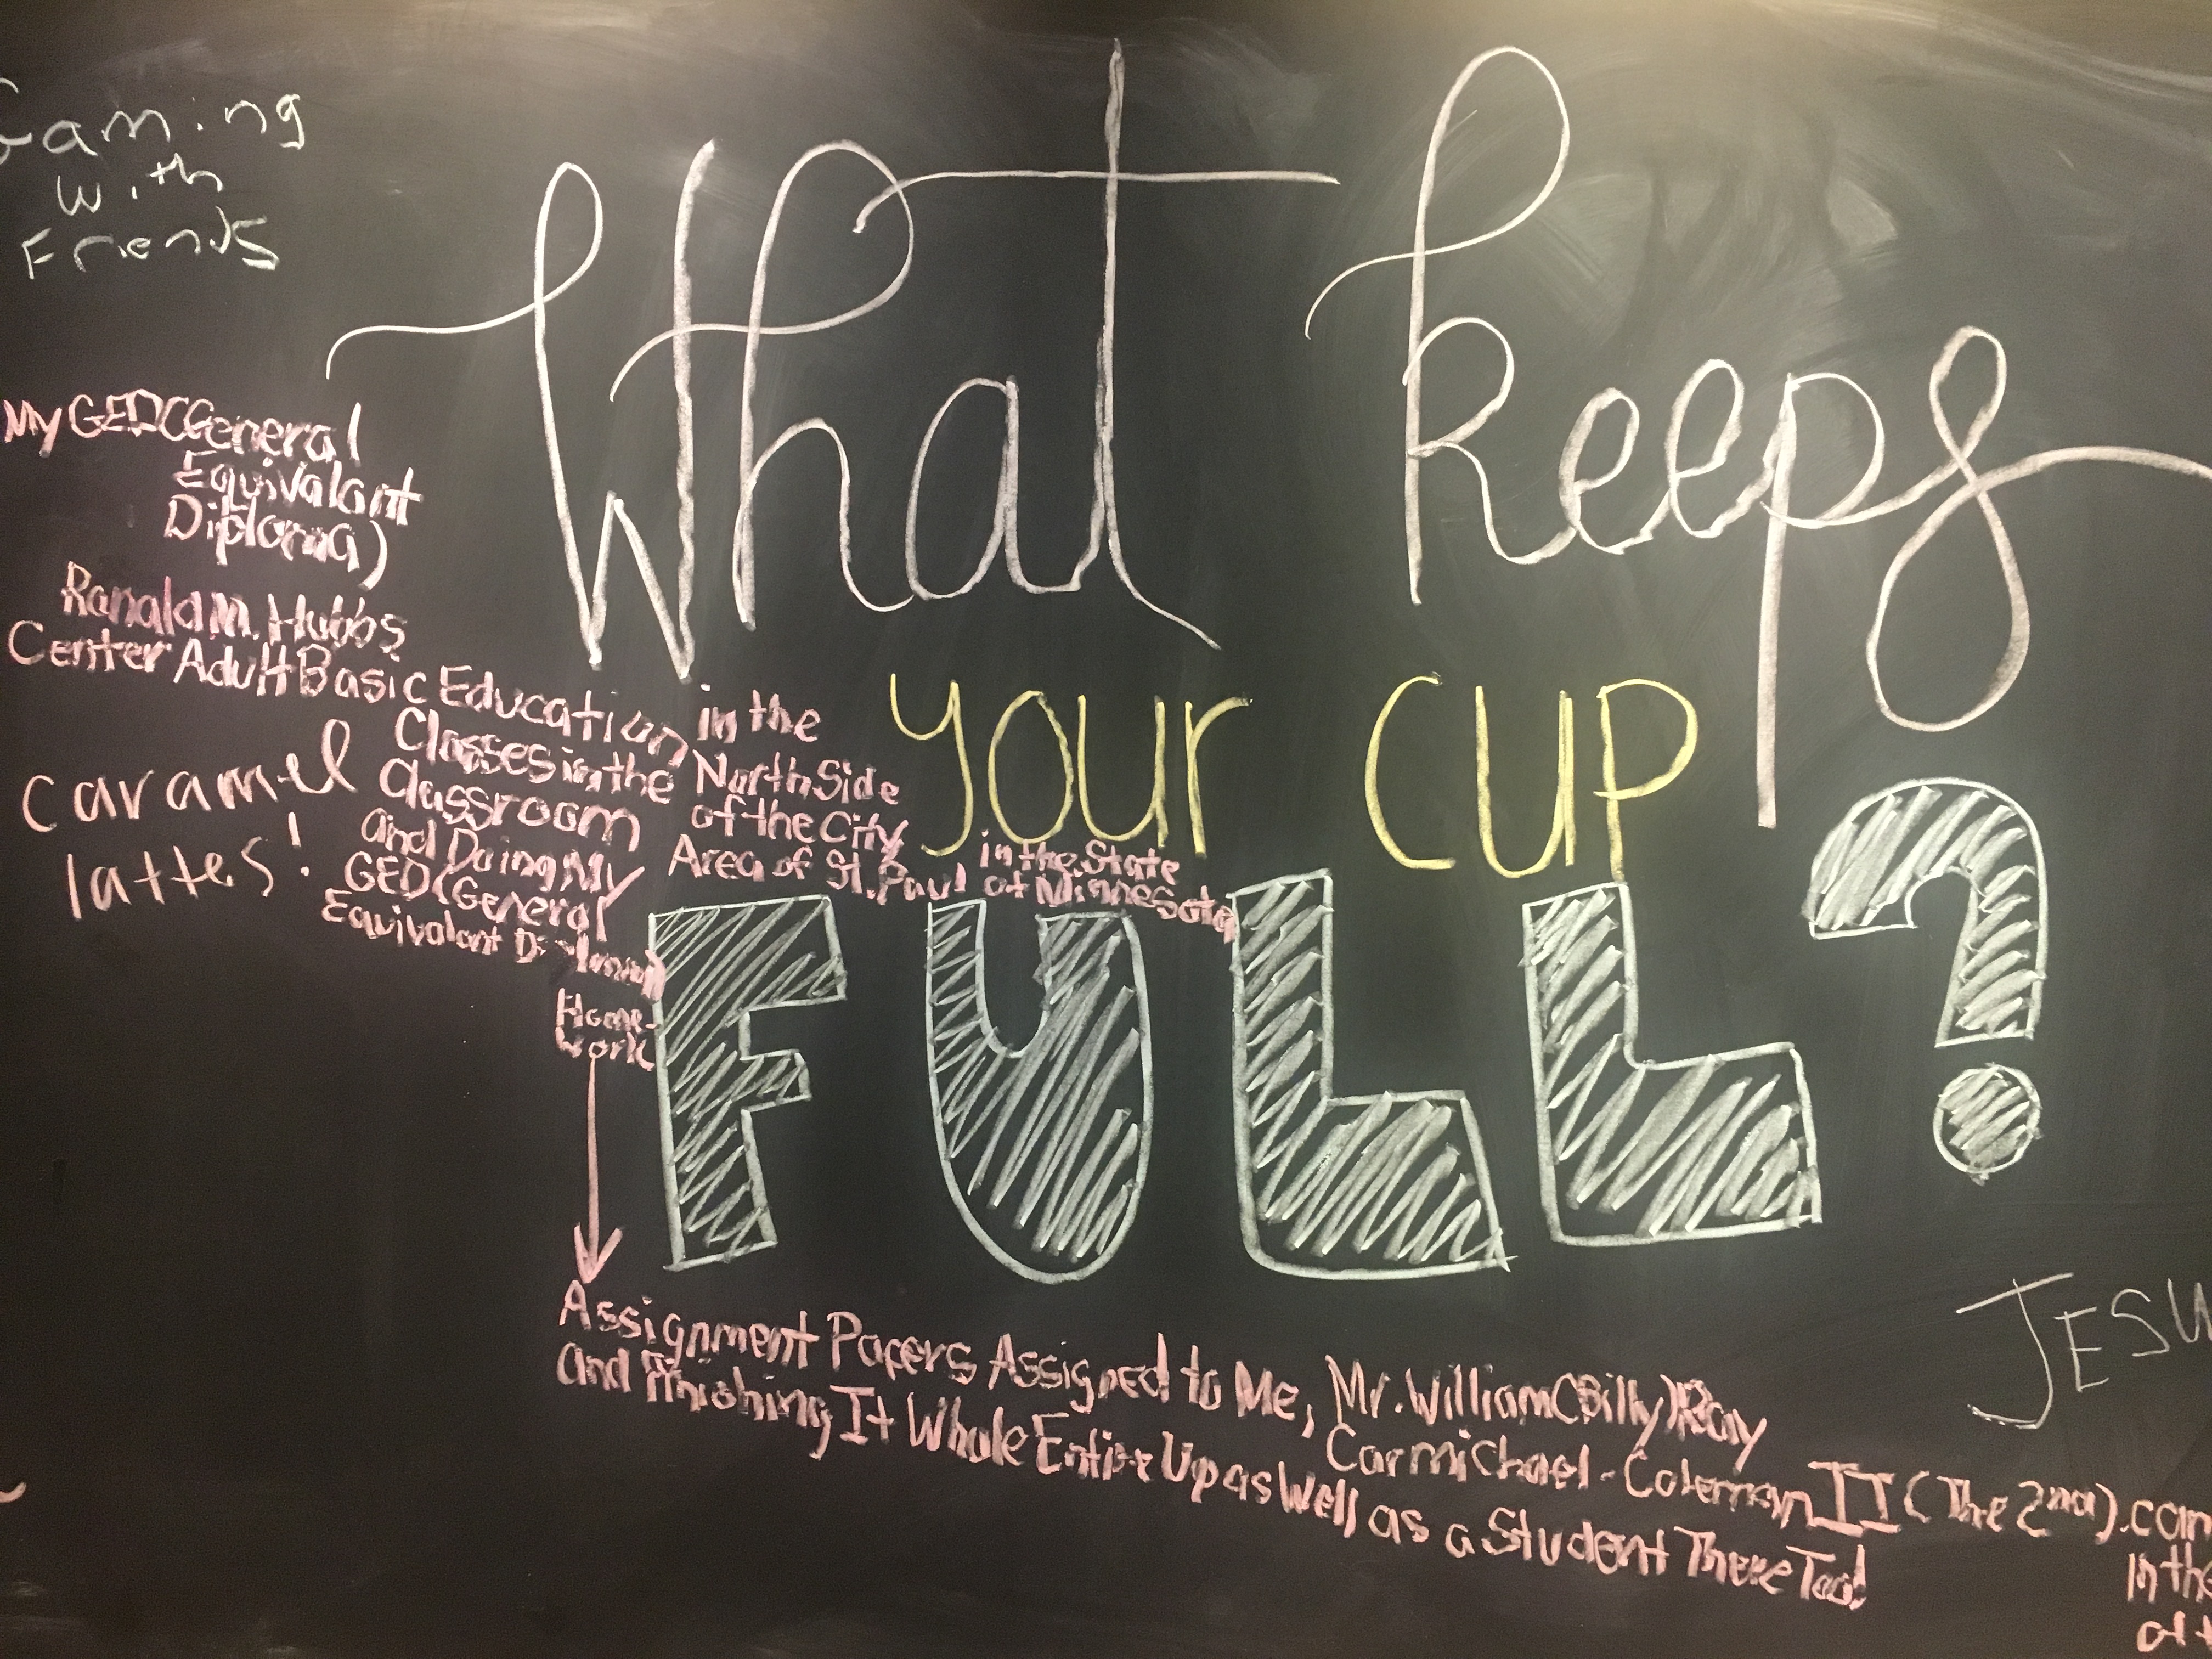 what keeps your cup full